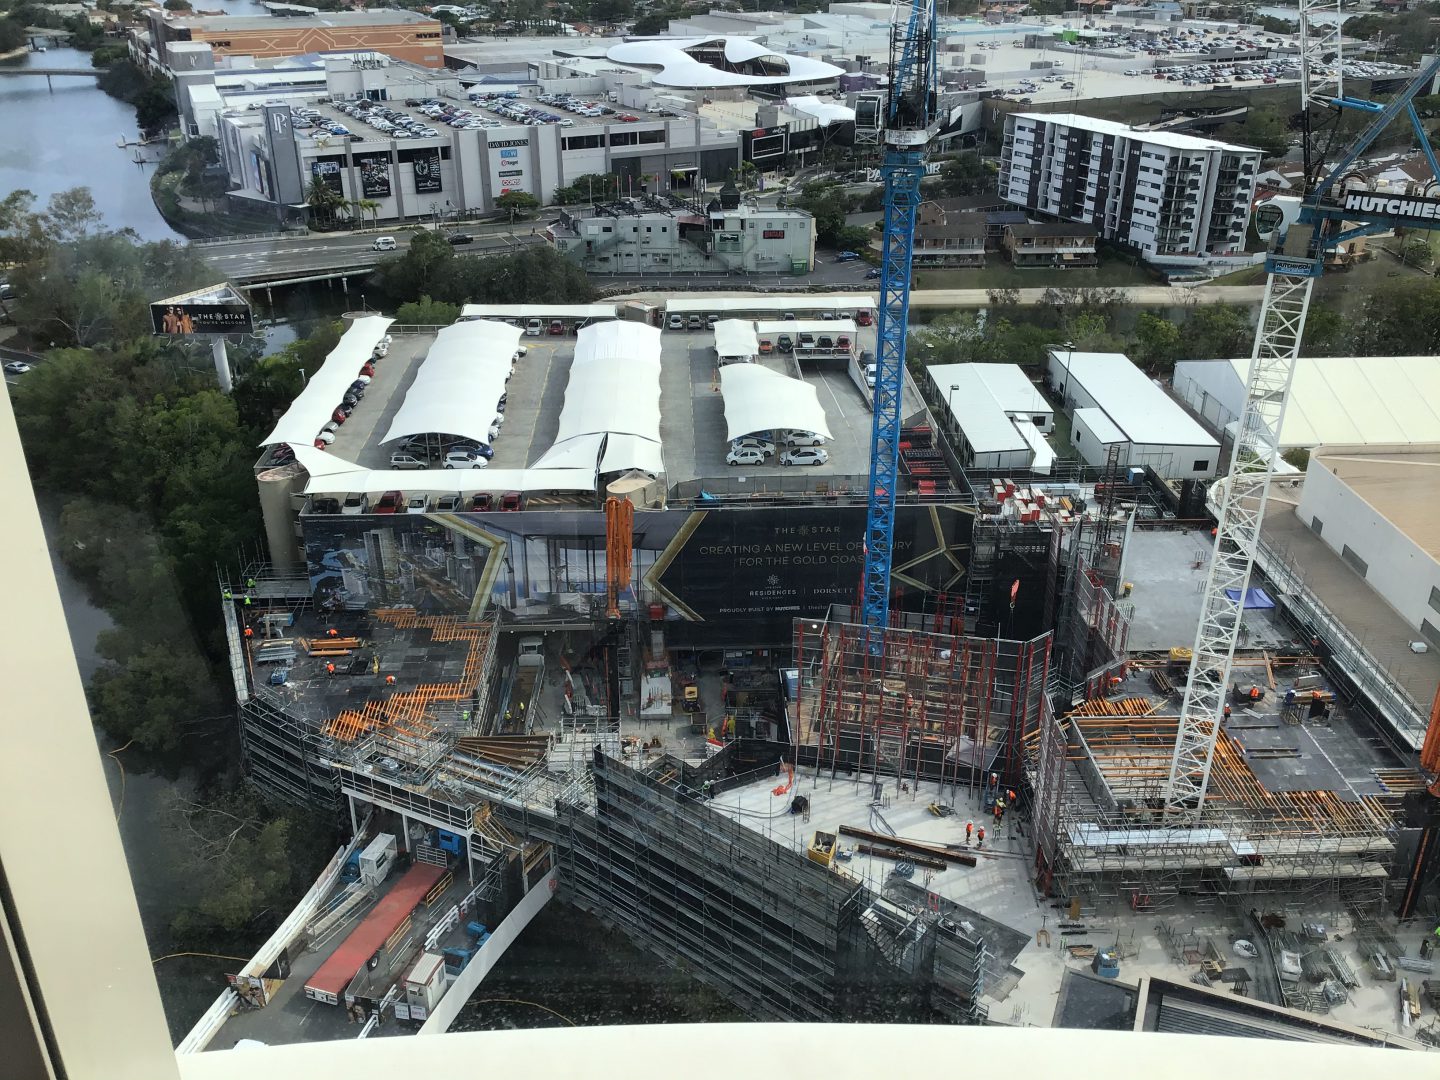 The Star Residences Construction update Jan 2020 (image provided by Project Marketing Australia)